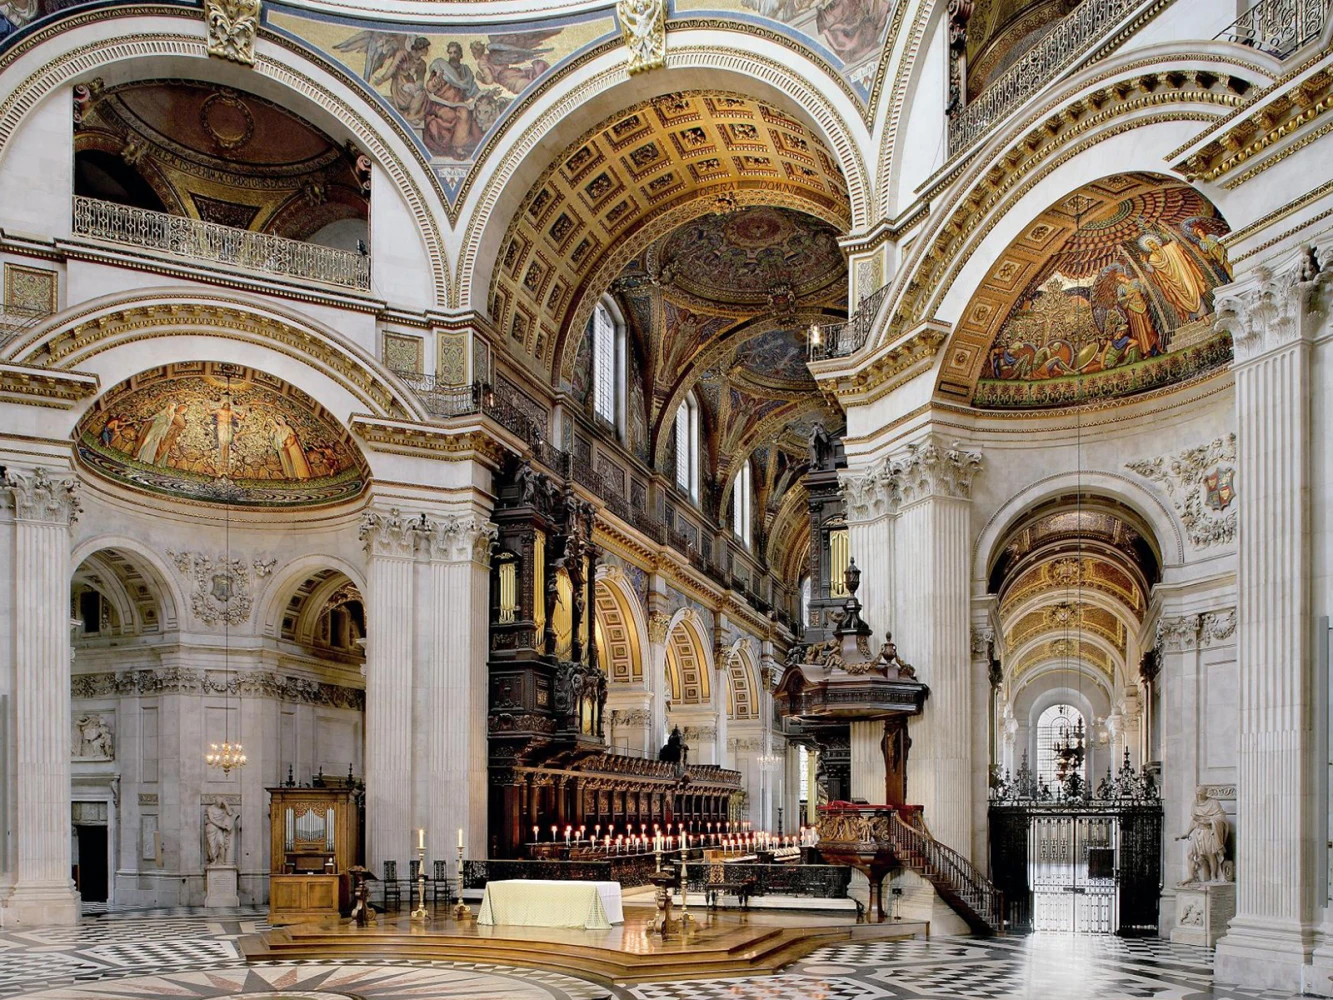 St. Pauls Cathedral: What to expect - 2